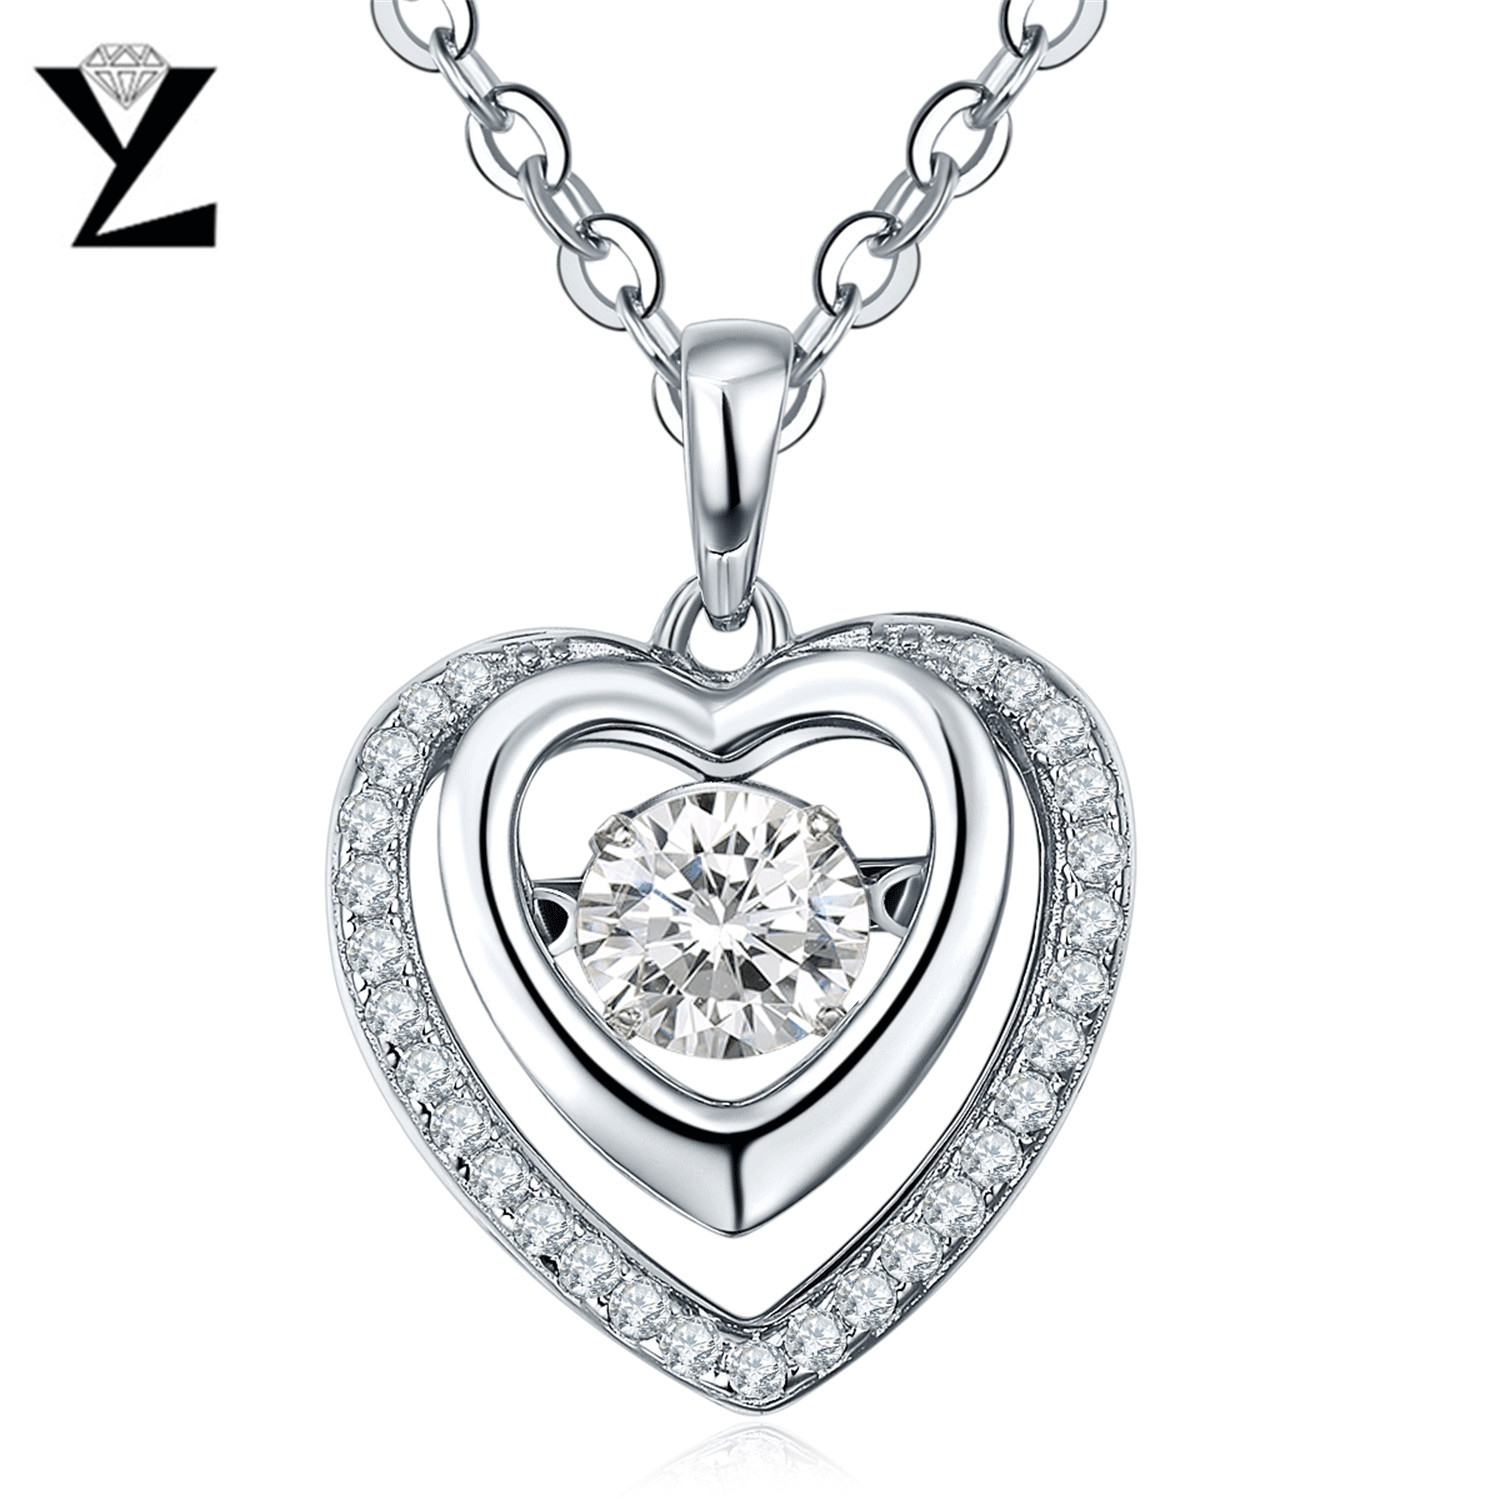 Charm Locket Necklace
 YL Real 925 Sterling Silver Heart Necklace Dancing Natural